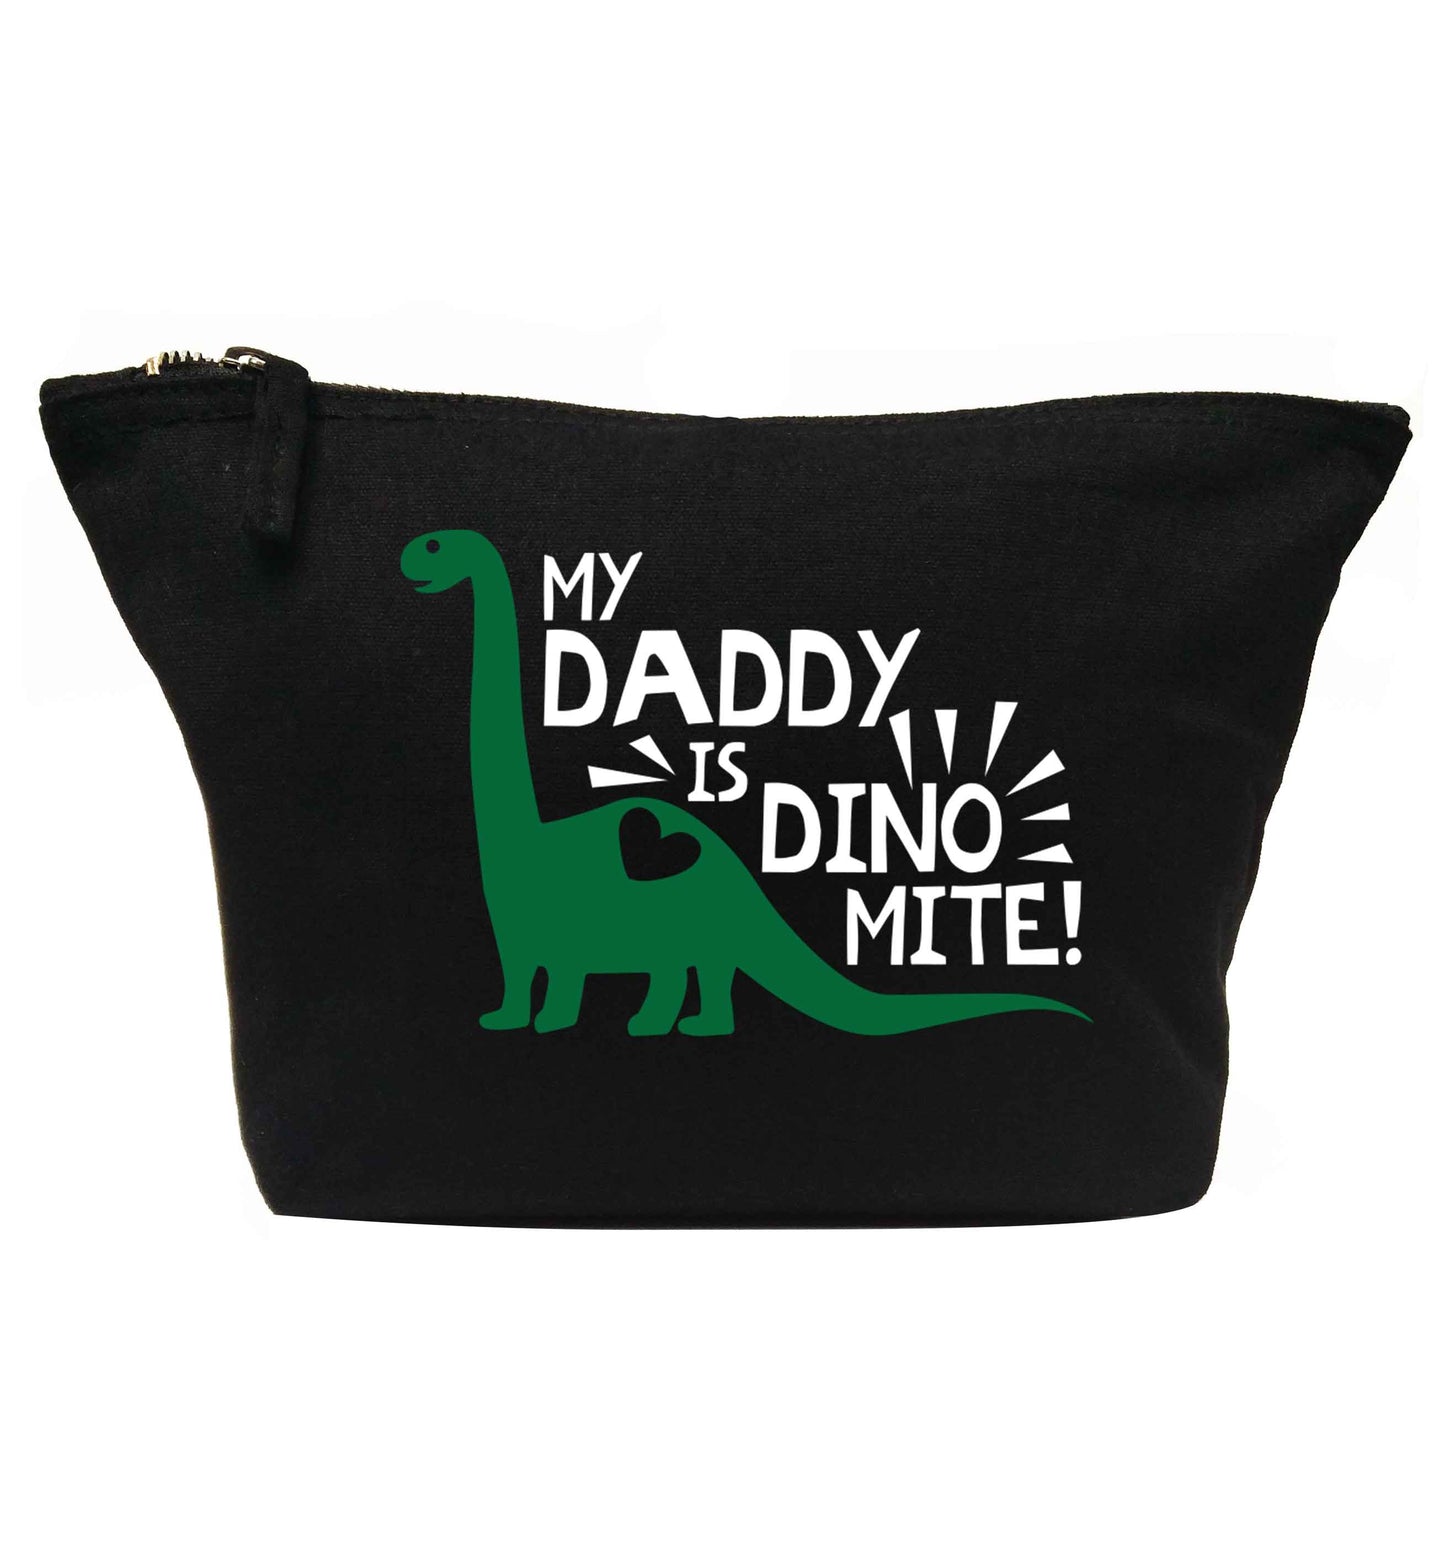 My daddy is dinomite! | makeup / wash bag